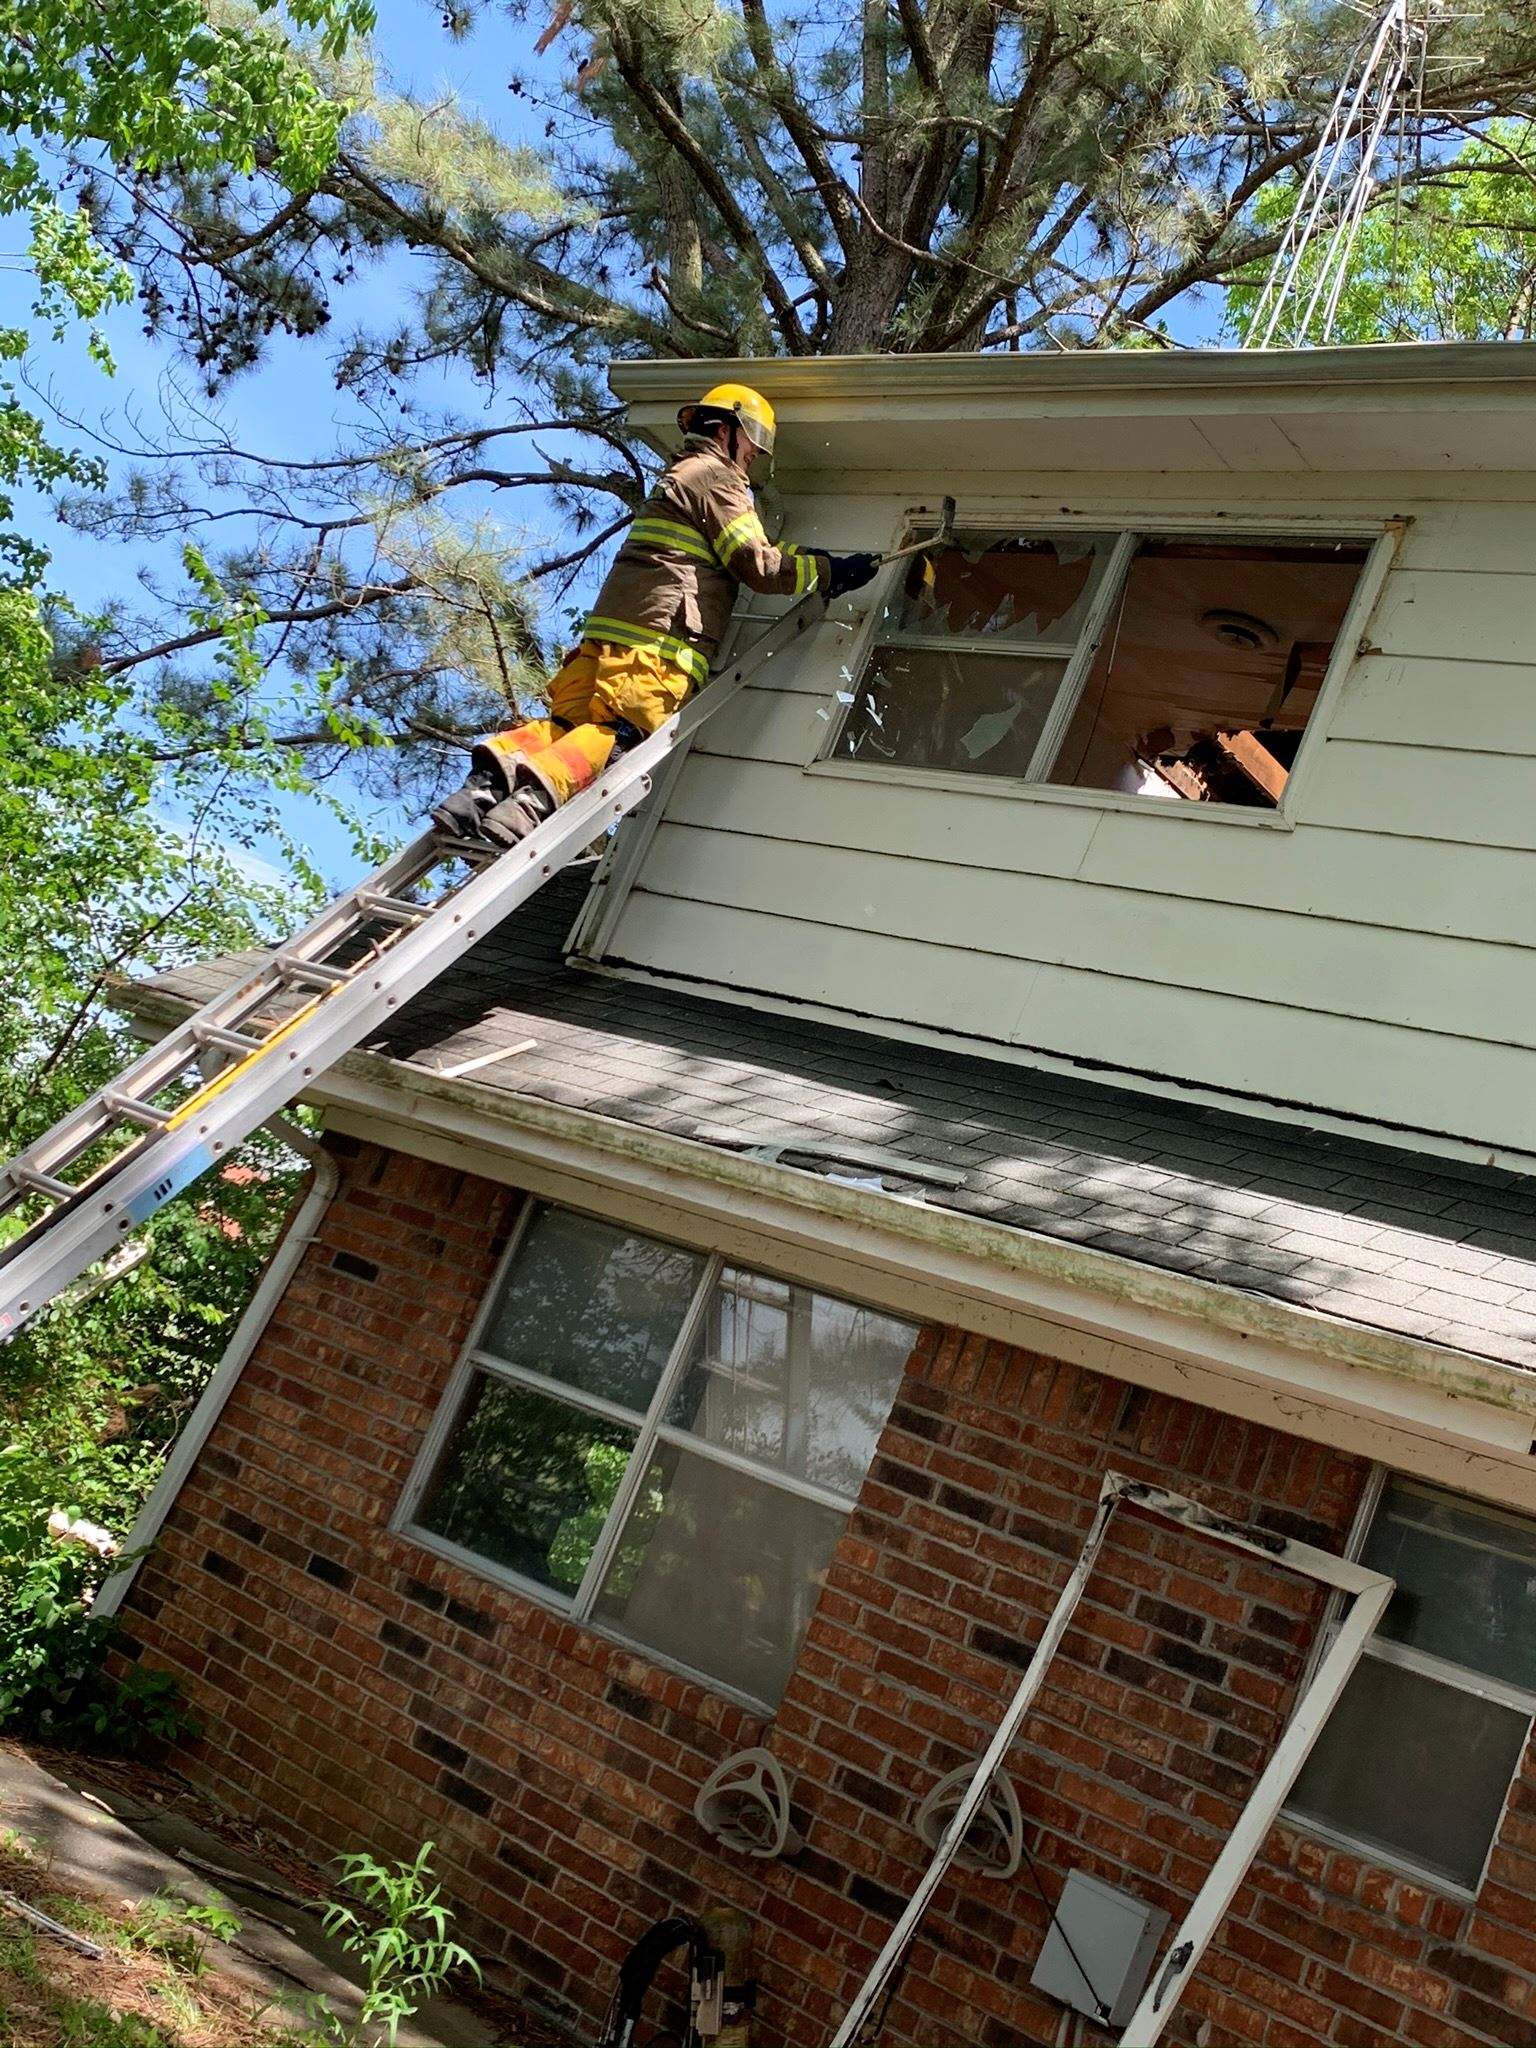 Picture of a firefighter climbing up a ladder into a house